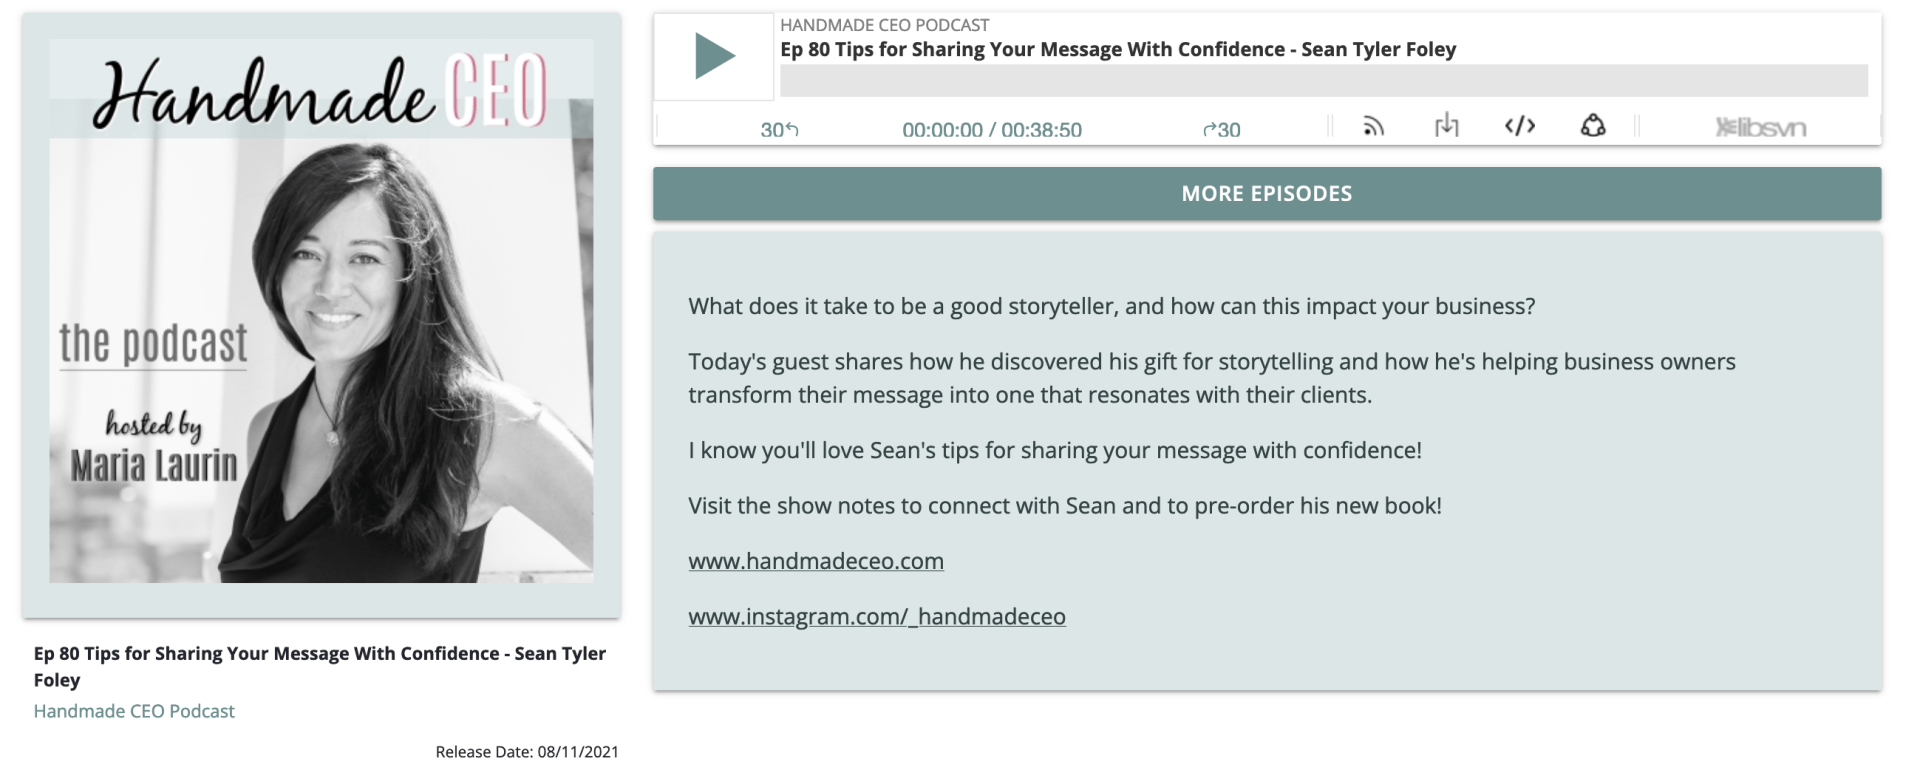 Tips for Sharing Your Message with Confidence